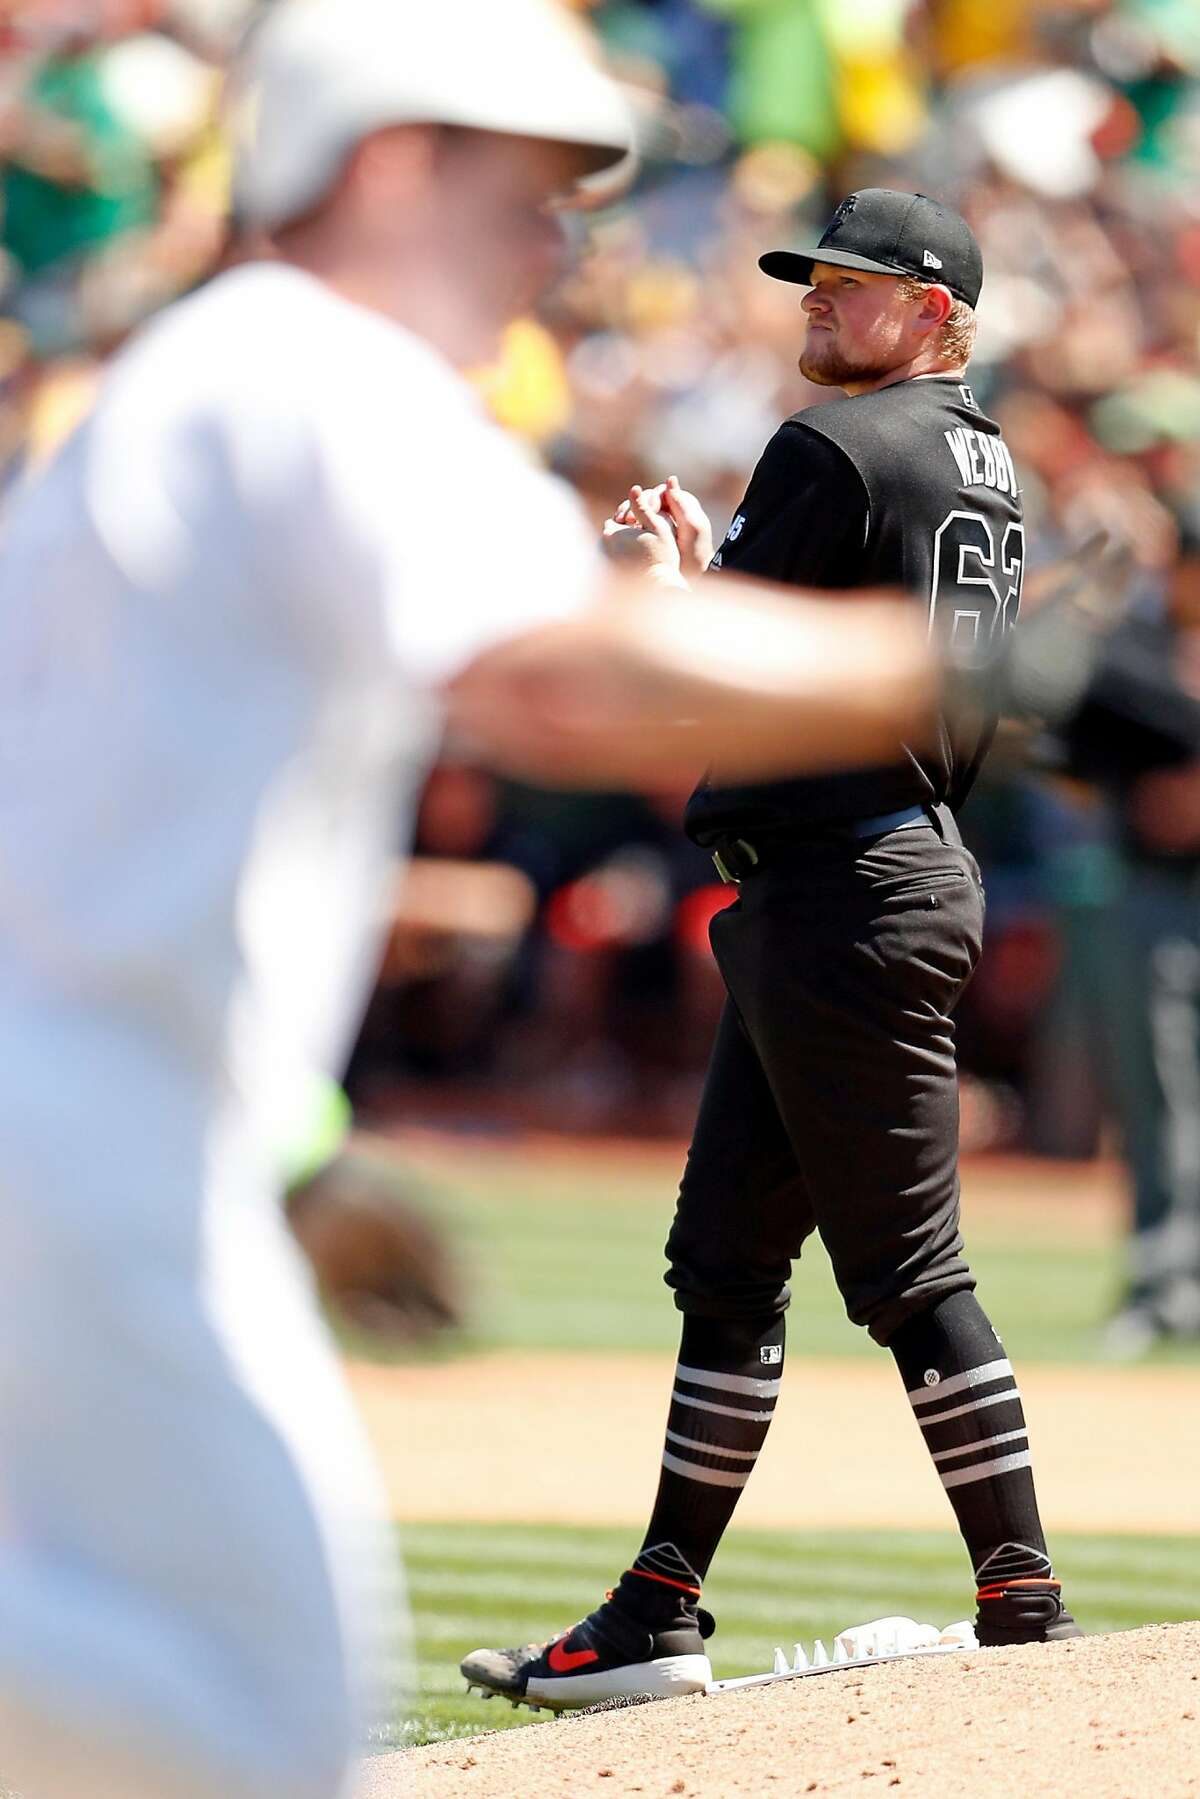 San Francisco Giants' starting pitcher Logan Webb looks away in the 4th inning as Oakland Athletics' Mark Canha rounds the bases after his second solo home run of the game during MLB game at Oakland Coliseum in Oakland, Calif., on Sunday, August 25, 2019.